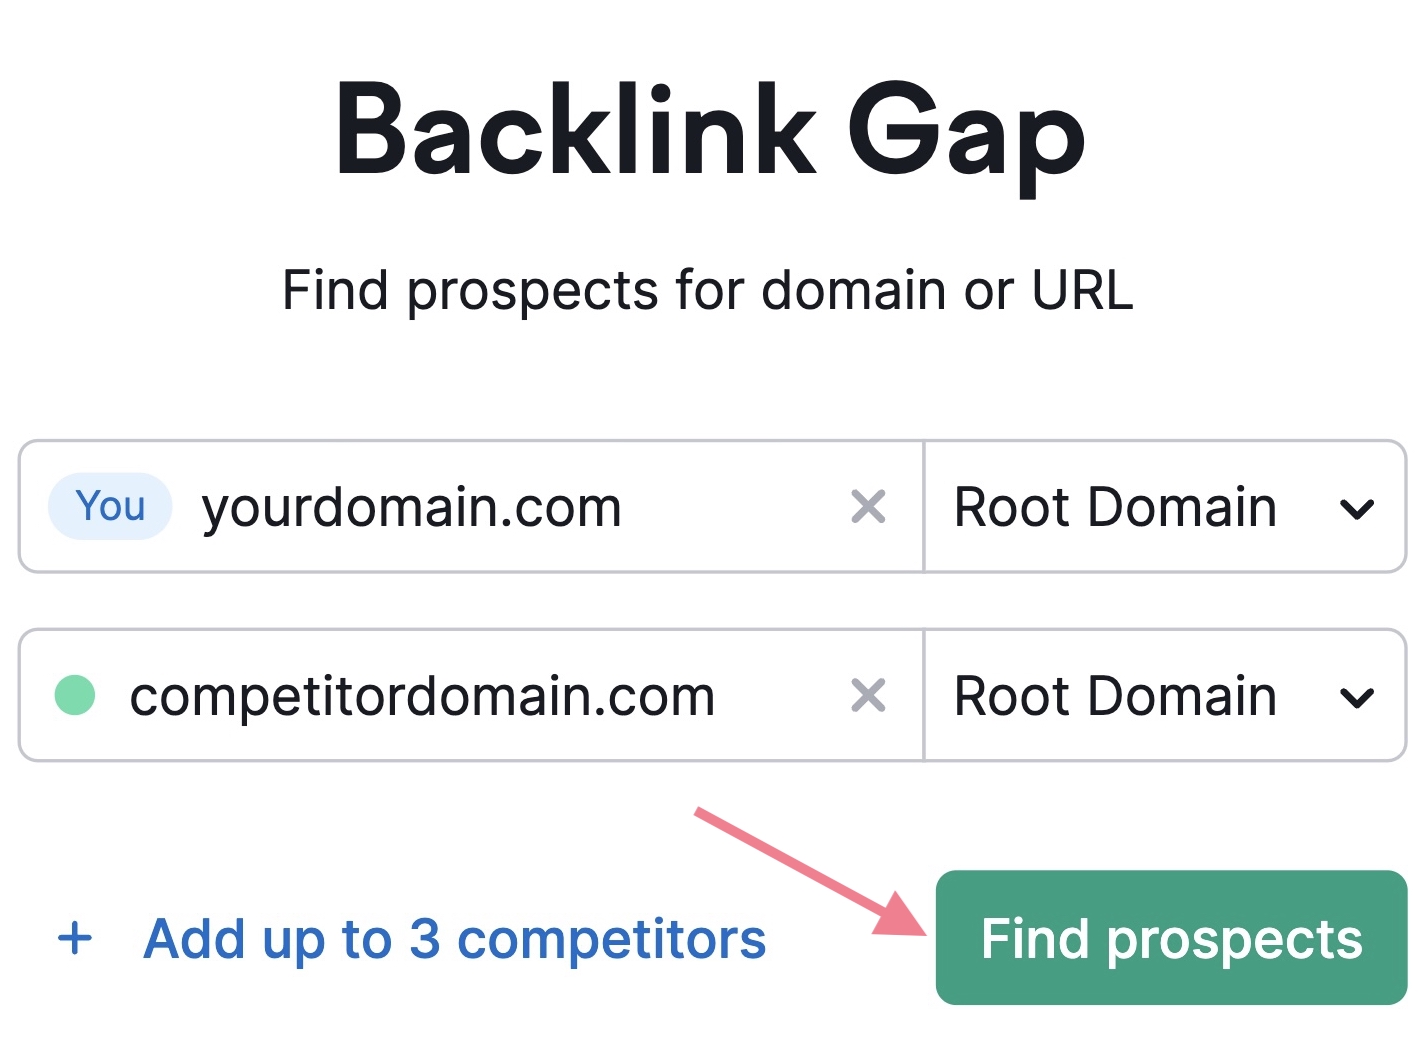 enter yours and competitor's domain in Backlink Gap tool.search